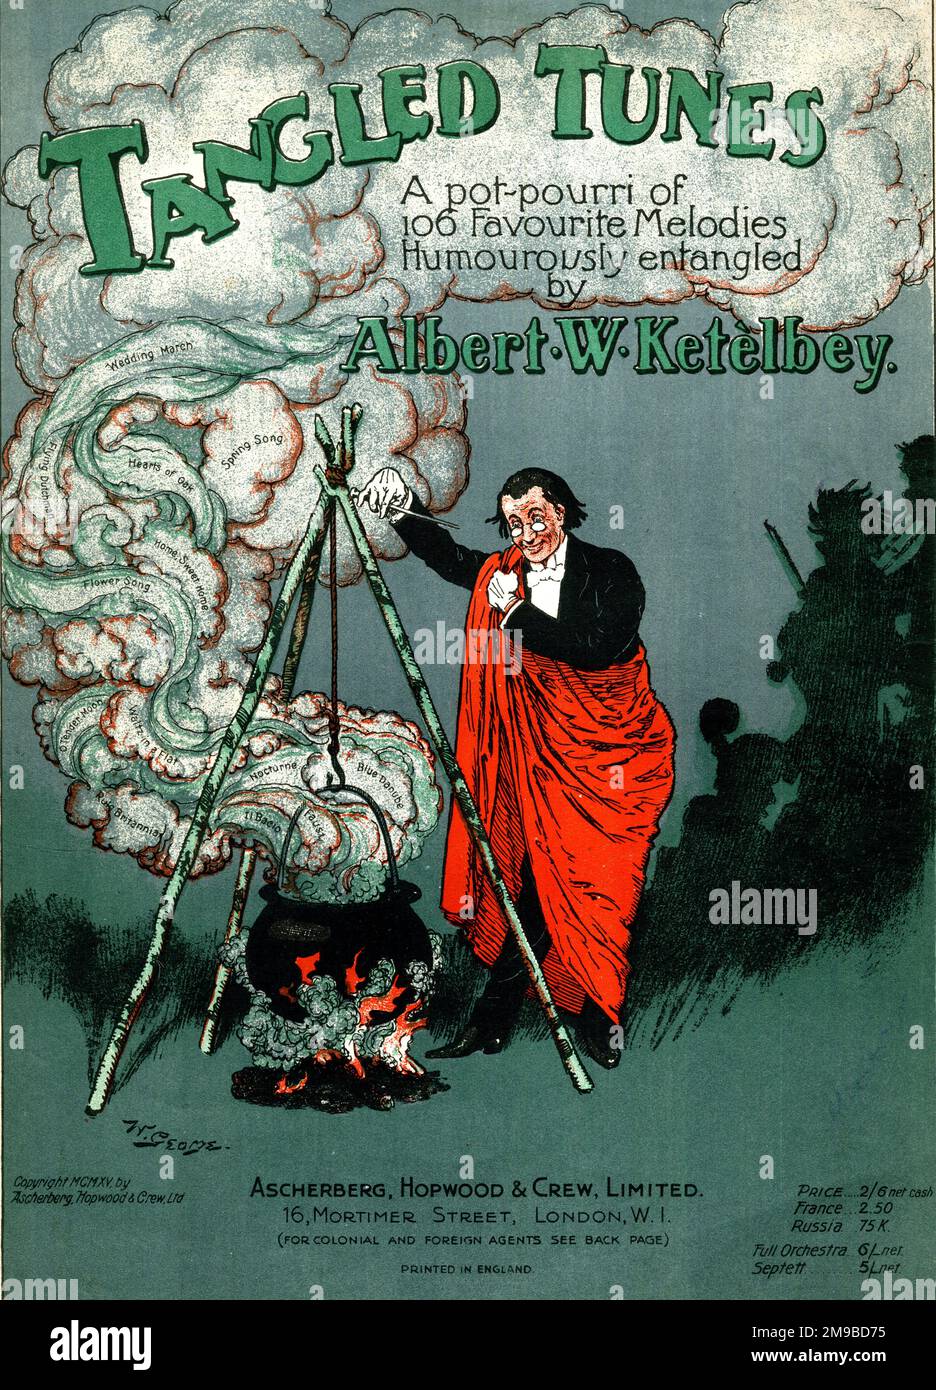 Music cover, Tangled Tunes, a pot pourri of 106 favourite melodies humorously entangled by Albert W. Ketelbey Stock Photo